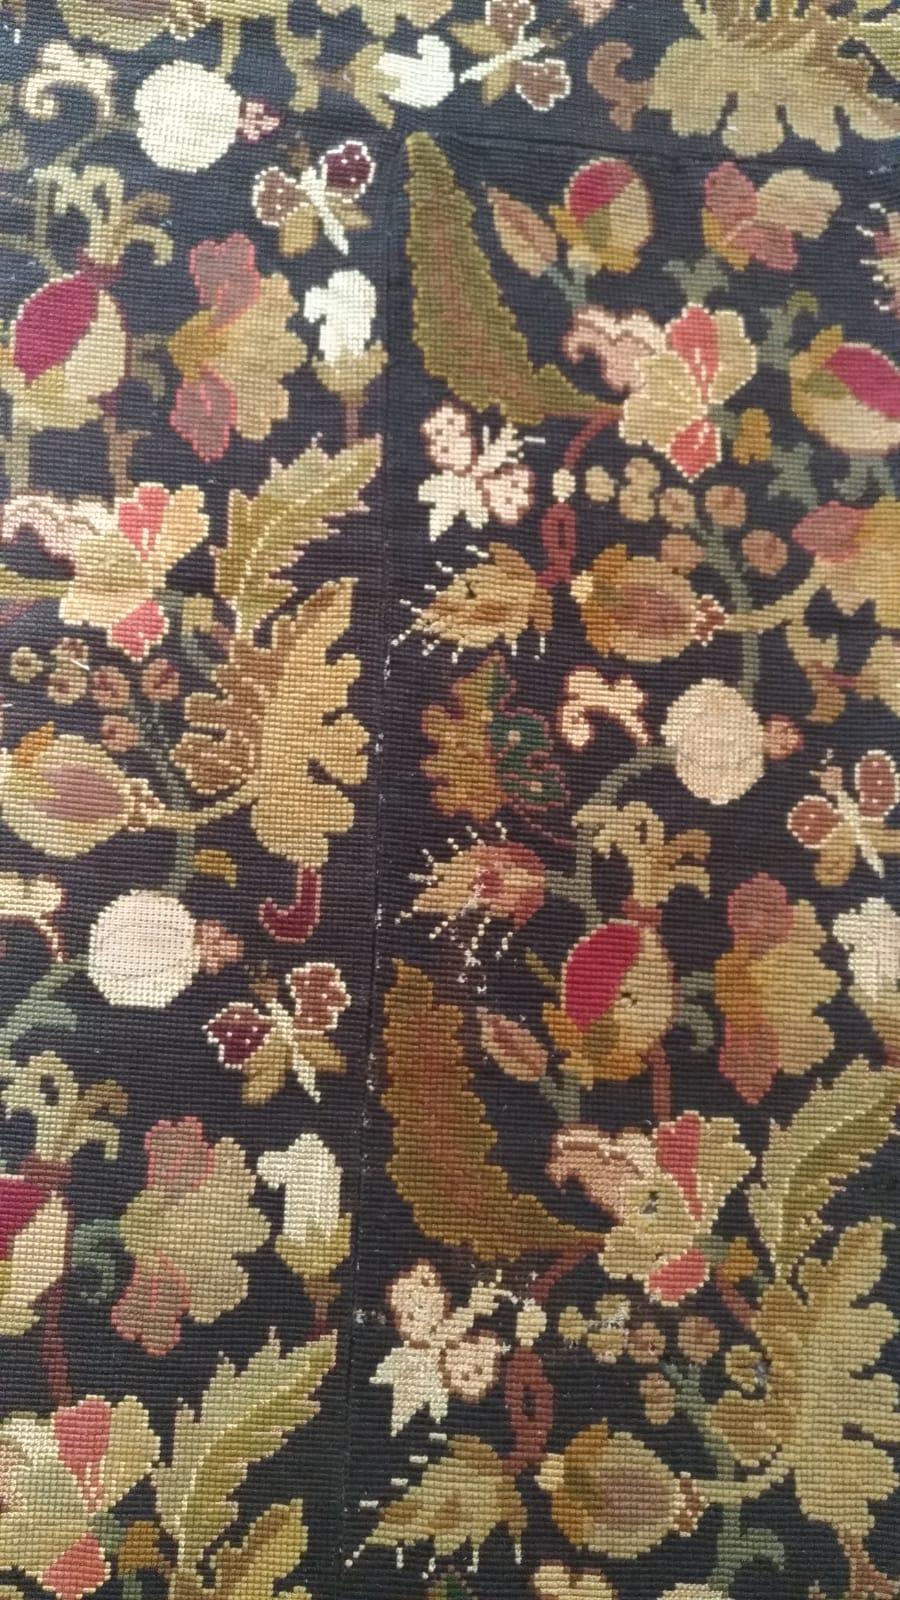 Wool 928 - 19th Century Needle Point Carpet For Sale